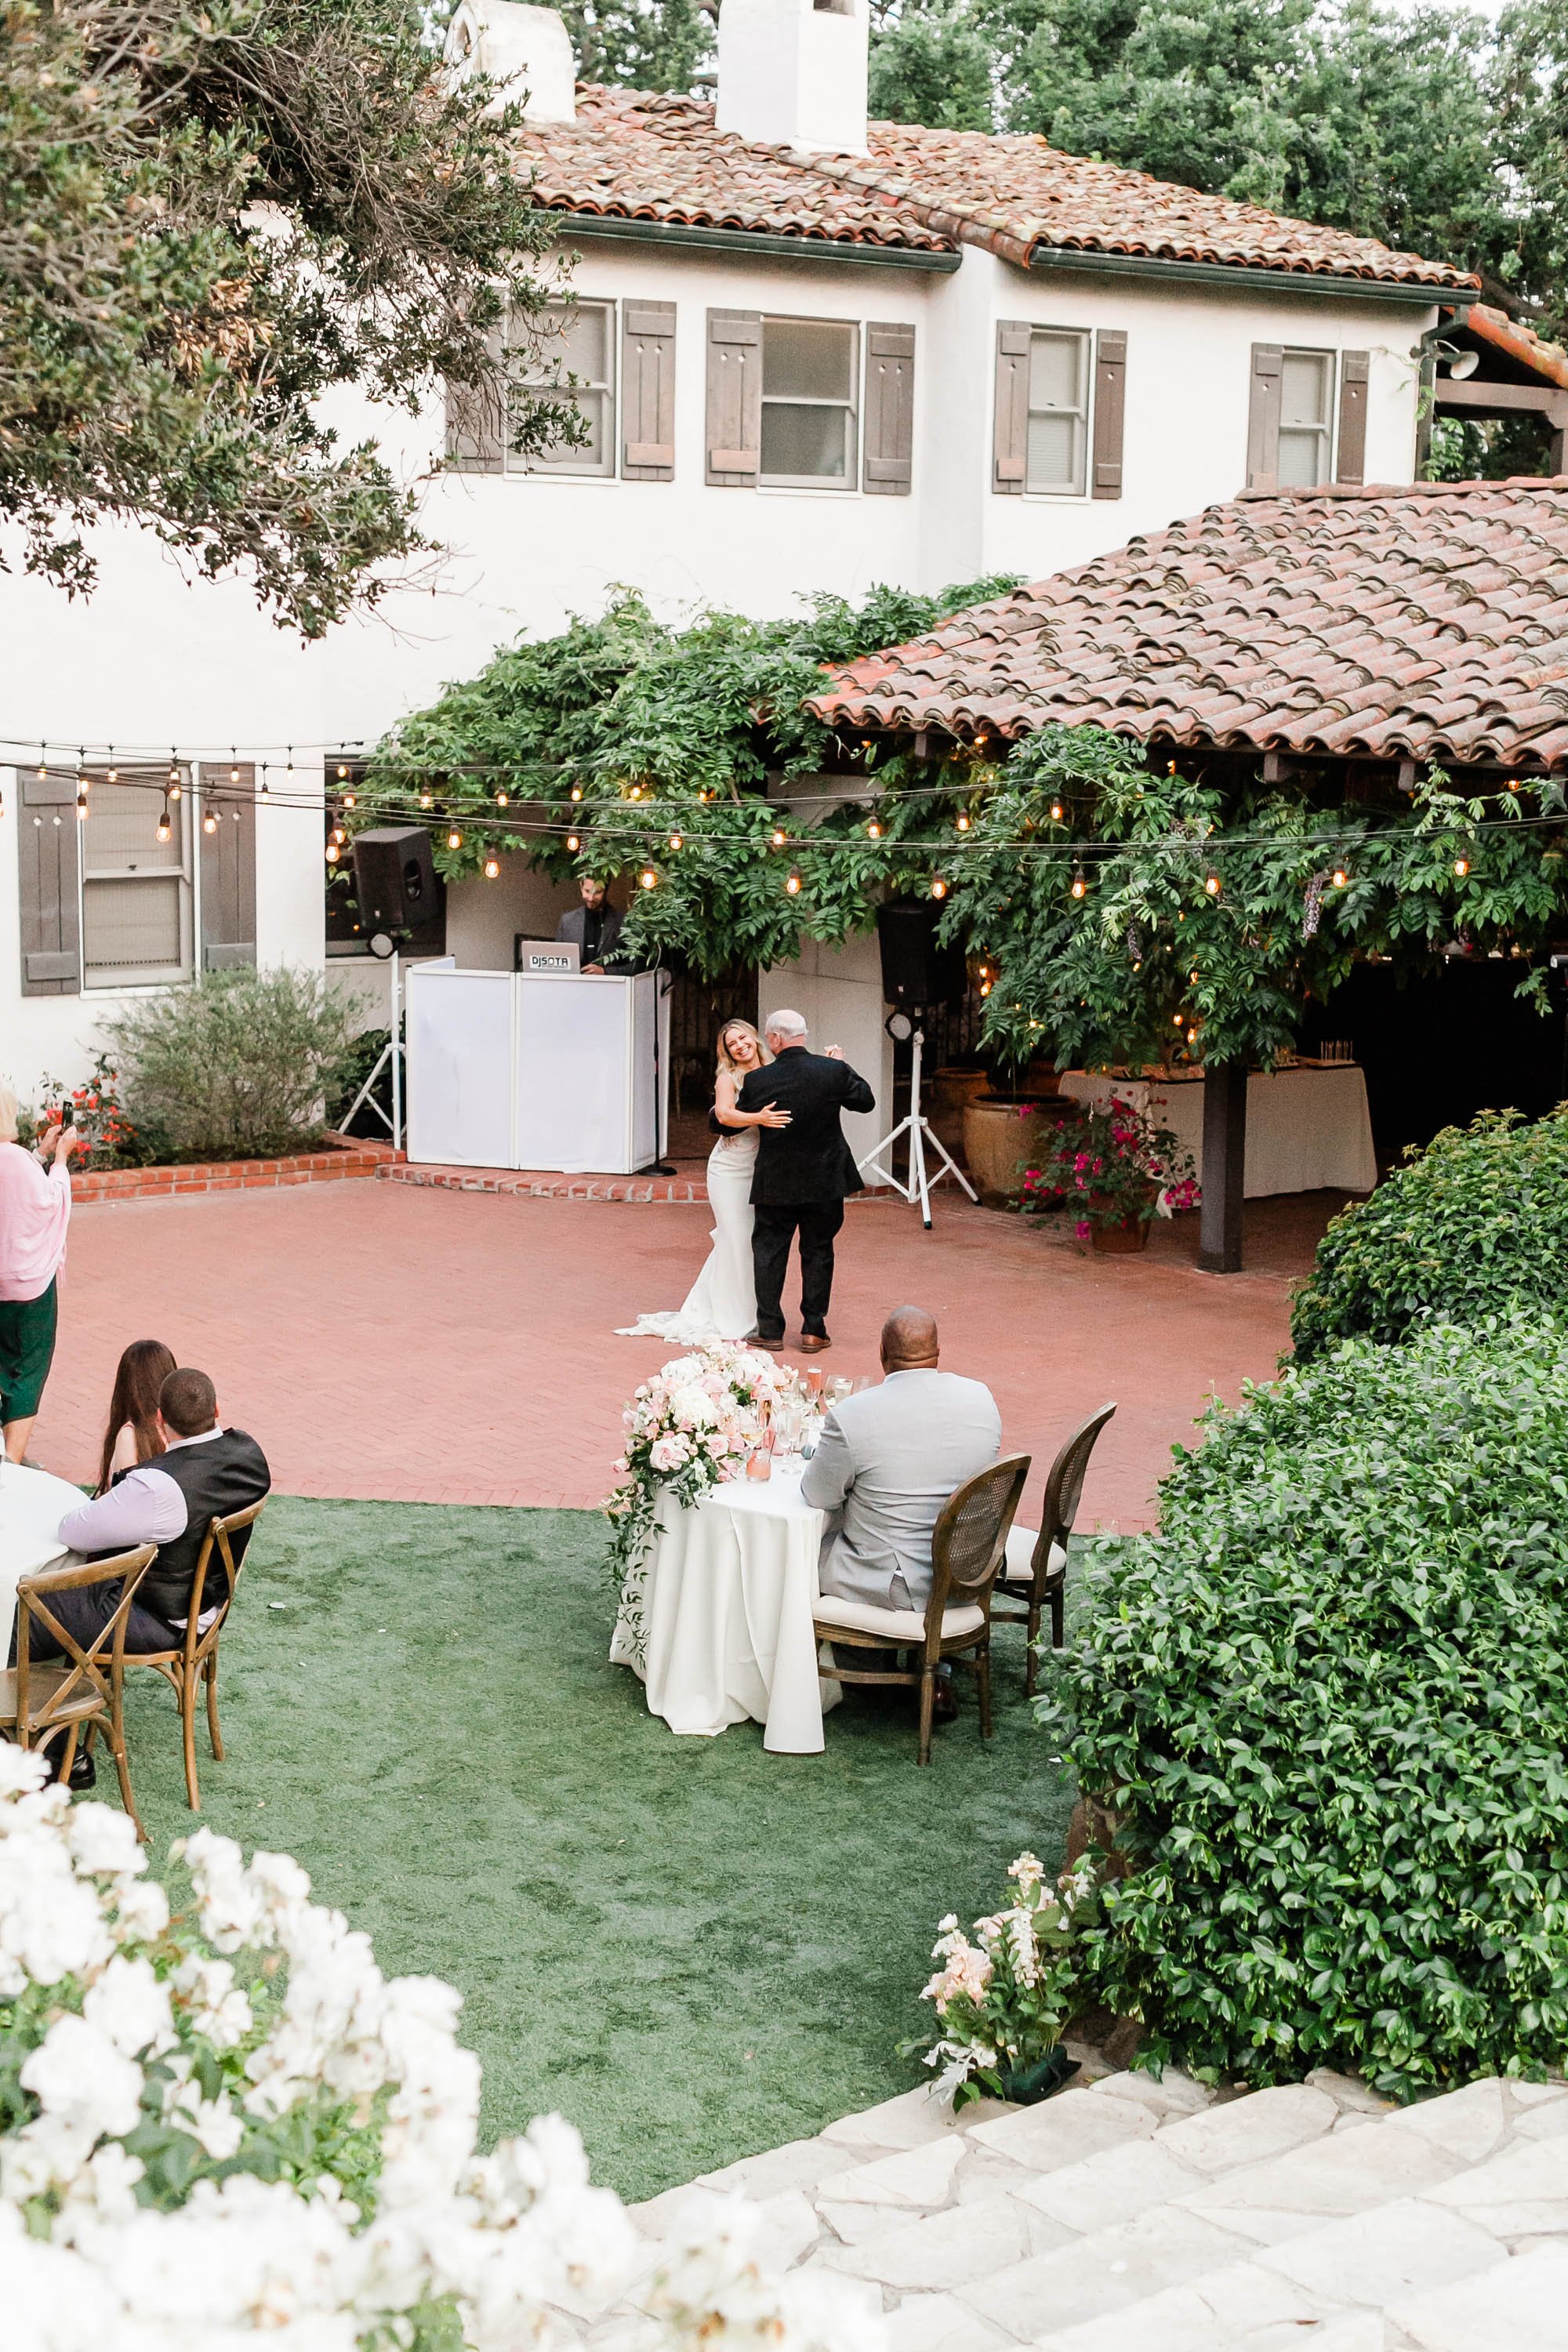 Outdoor reception at Spanish style ranch house, Quail Ranch events, wedding venue in Ventura county